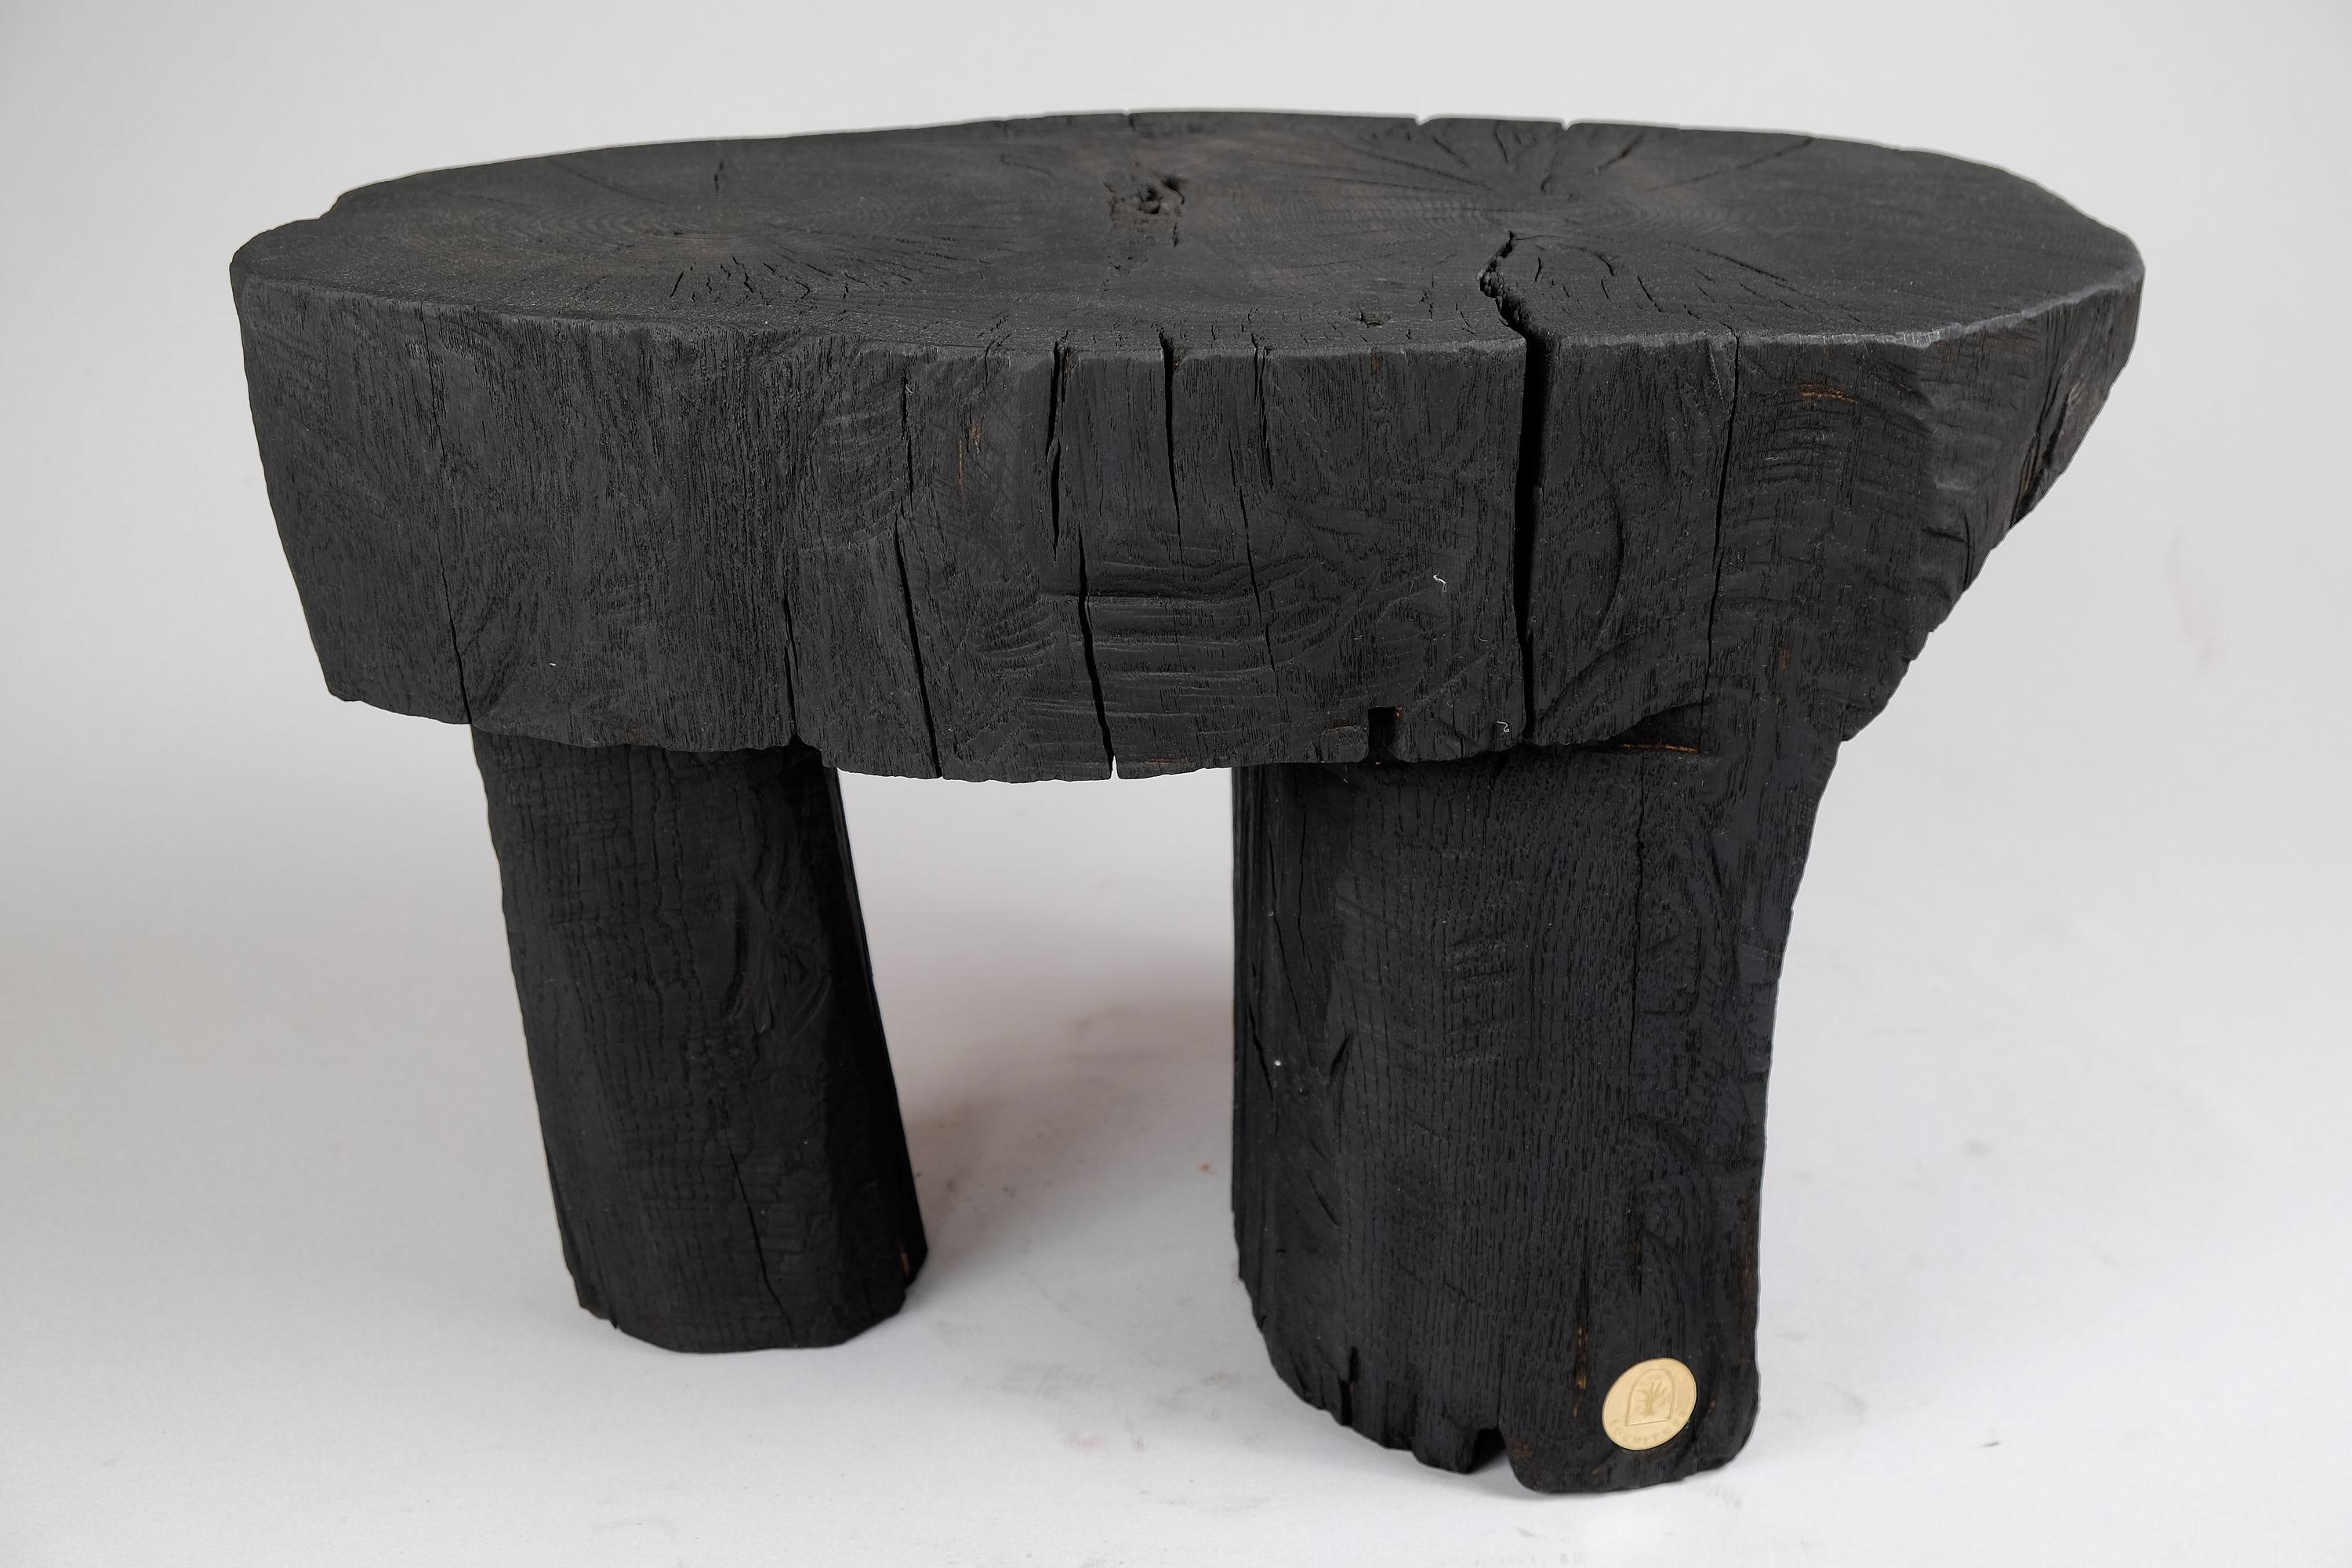 Unique chainsaw carved wooden contemporary rustic side table/stool. Carved from a single piece of wood and protected with the highest quality oils, ensuring durability for generations. Such unique handmade design will highlight your interior and